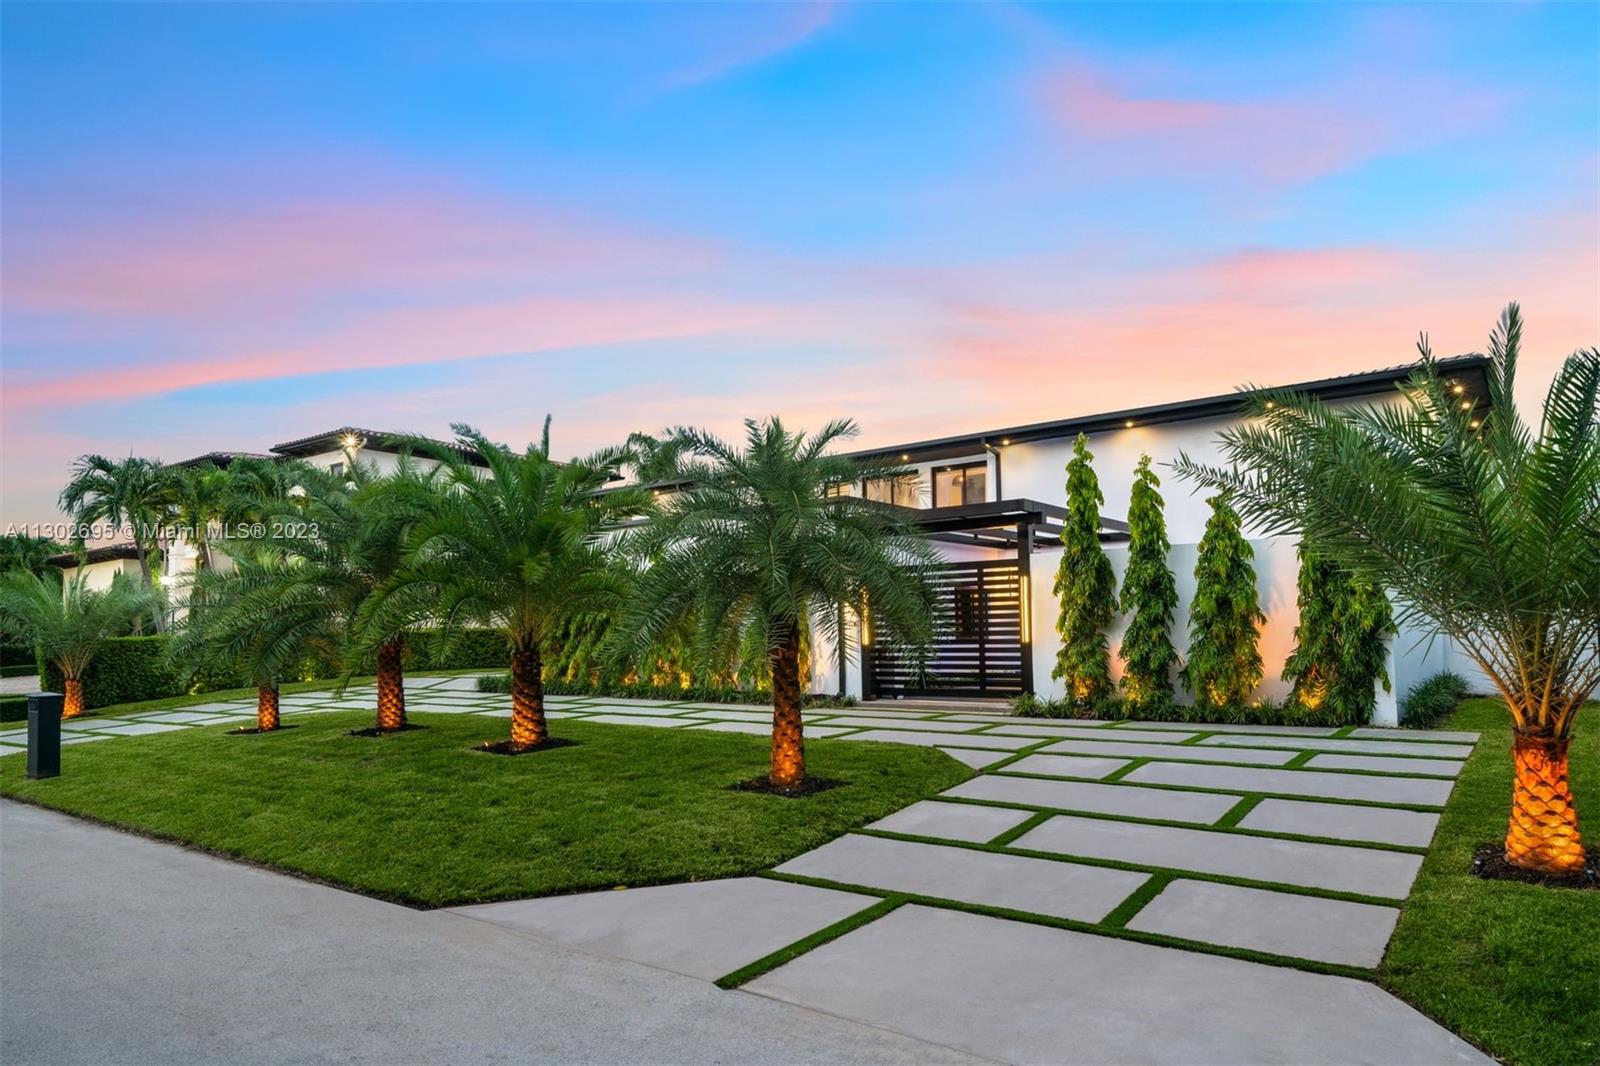 2021-22 Completely Renovated 8 BD 8 BA luxury waterfront home in Gables by the Sea with 100' Direct Ocean Access, No Bridges to Biscayne Bay. All new electric, plumbing, cement tile roof, 5/8" sheetrock, full impact glass, 48x48 porcelain floors, 4-zone AC, 2-car lift-capable garage, 2 laundry rooms, 15 TVs & 16 cameras & state of the art sound system. Infinity edge heated saline beach entry pool & full summer kitchen. All new Thermador appliances, Fisher & Paykel range including gas appliances, wine display. New 80' epay wood dock to be included & in the permit process. Spacious 2nd floor principal bdrm, sitting room, wet bar & huge closet. Everything you desire in a 24/7 guard-gated Coral Gables Community with a park, top tier schools & municipal services. Voluntary HOA only $200/yr!